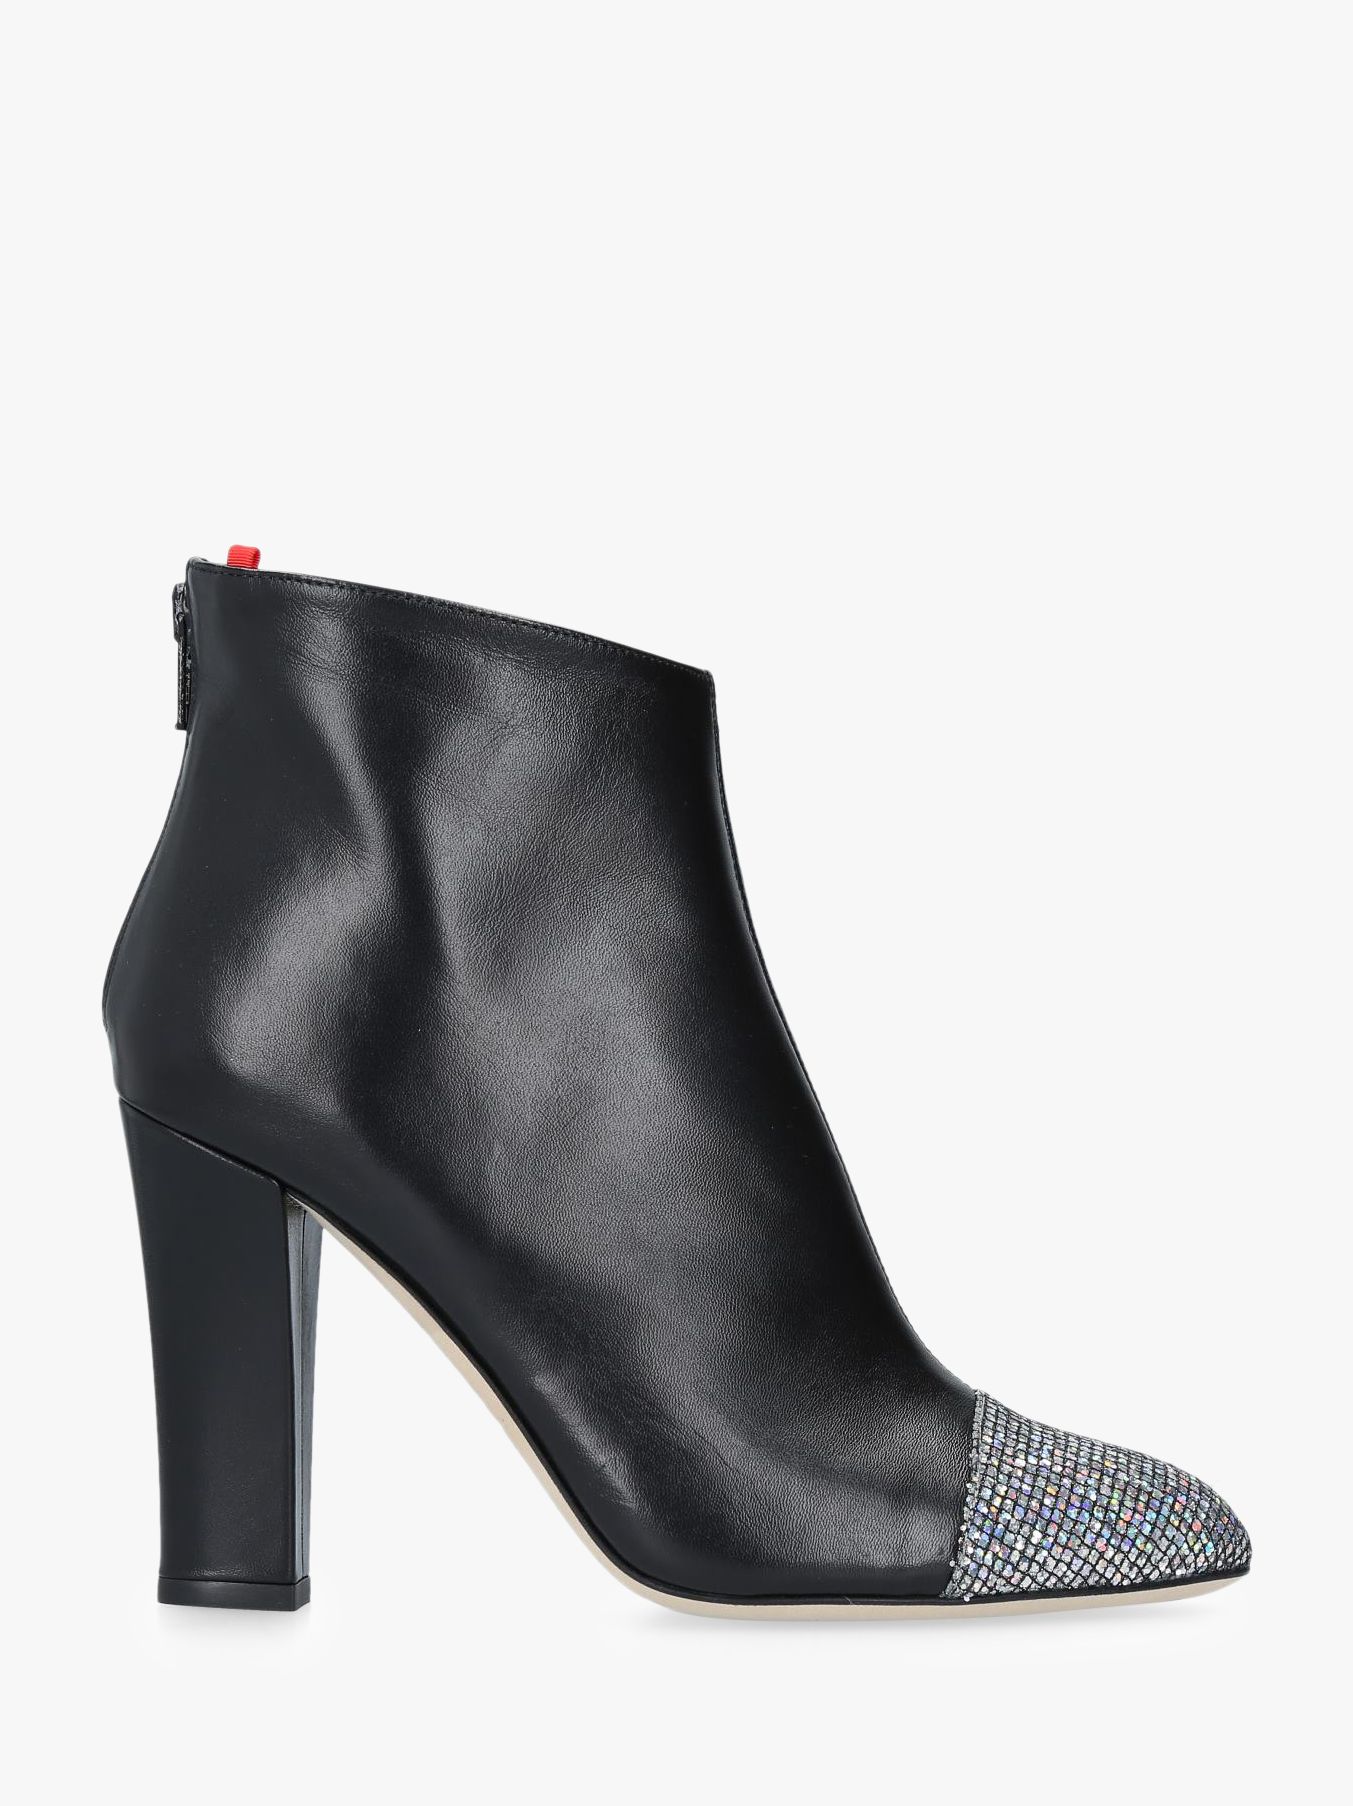 SJP by Sarah Jessica Parker Rumi Glitter Toe Ankle Boots, Black Leather